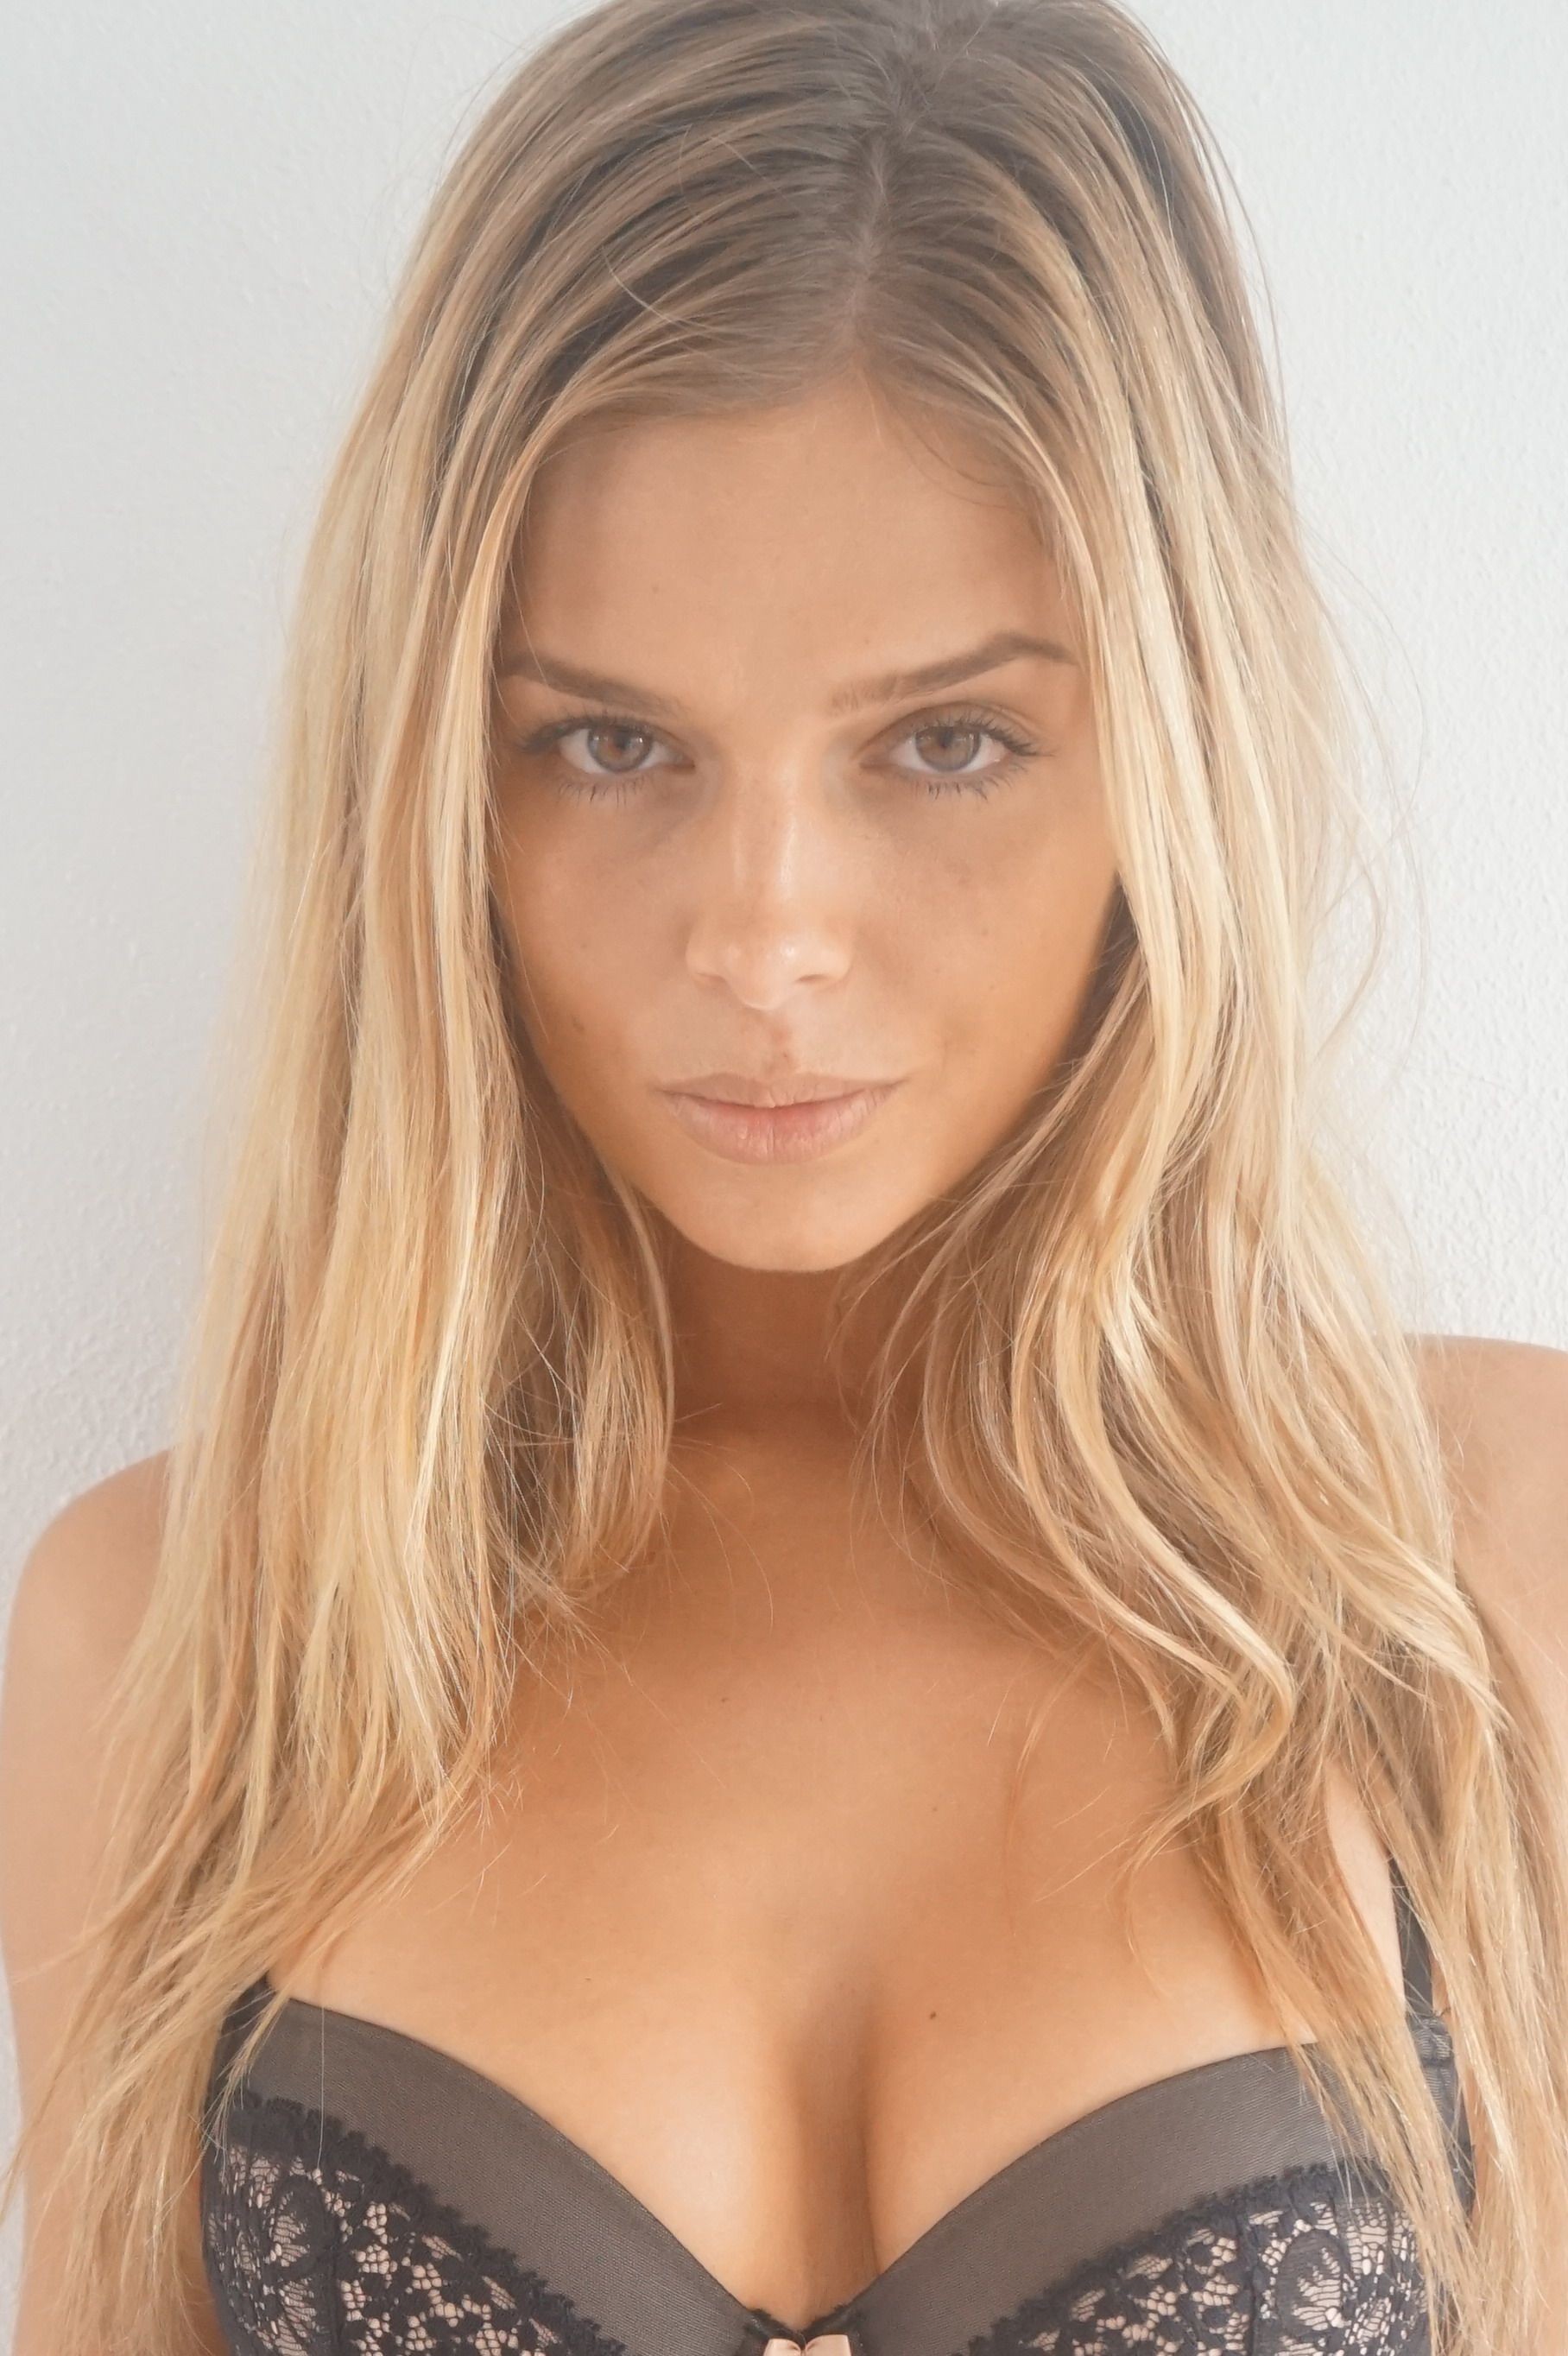 Danielle Knudson Nude TheFappening 214 - Danielle Knudson Nude Leaked (Over 200 Photos!)